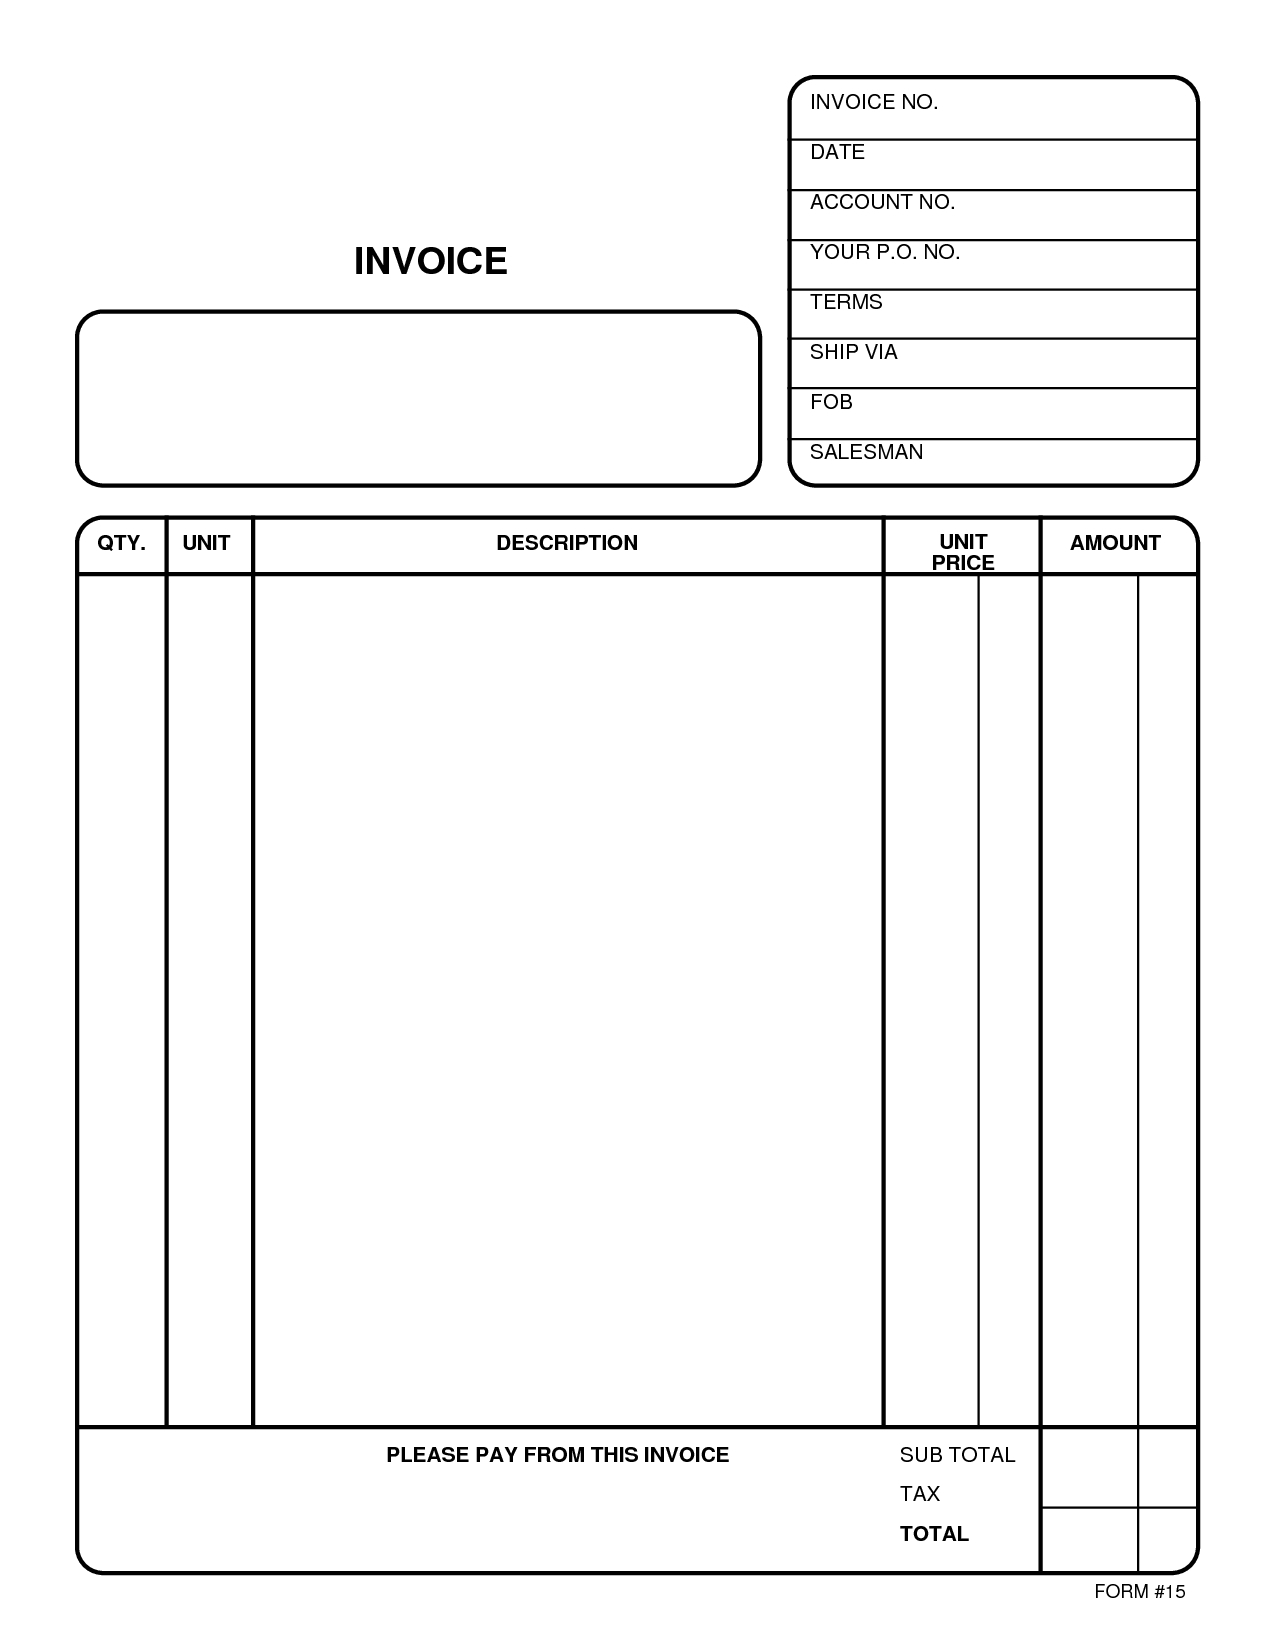 create a simple invoice template in word